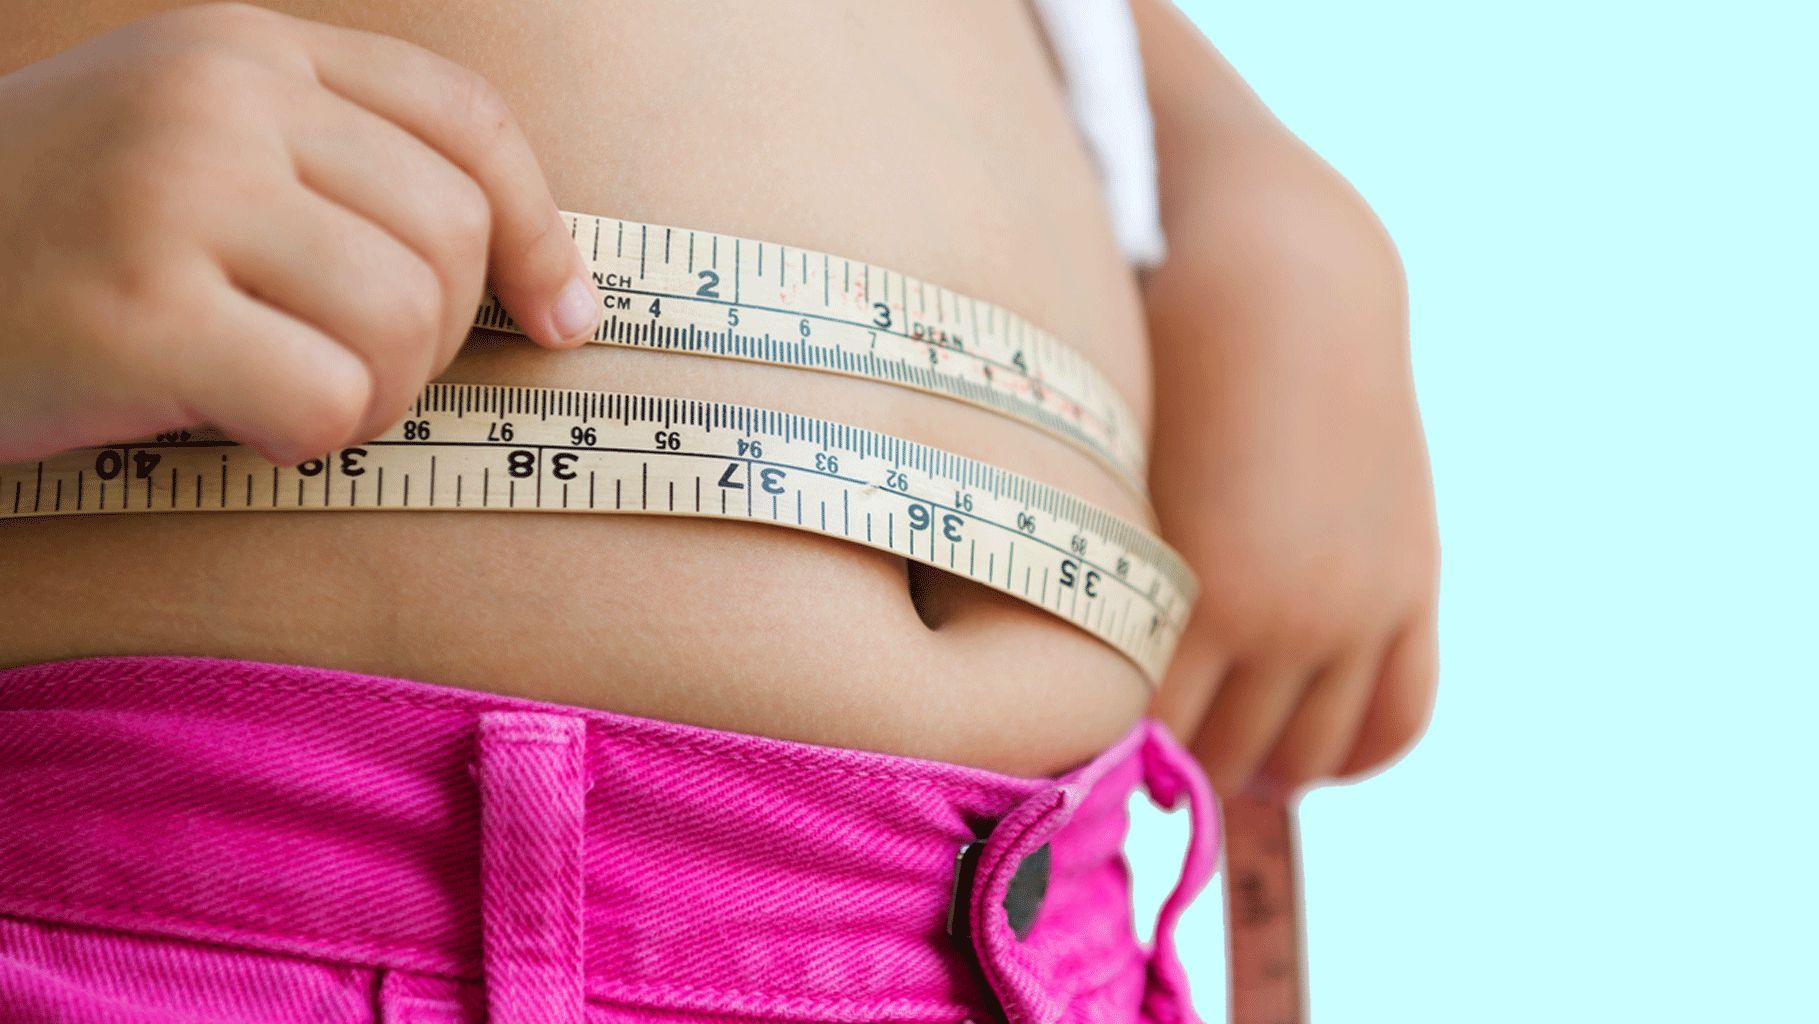 Children Who Are Body Shamed Are Likely to Gain More Weight